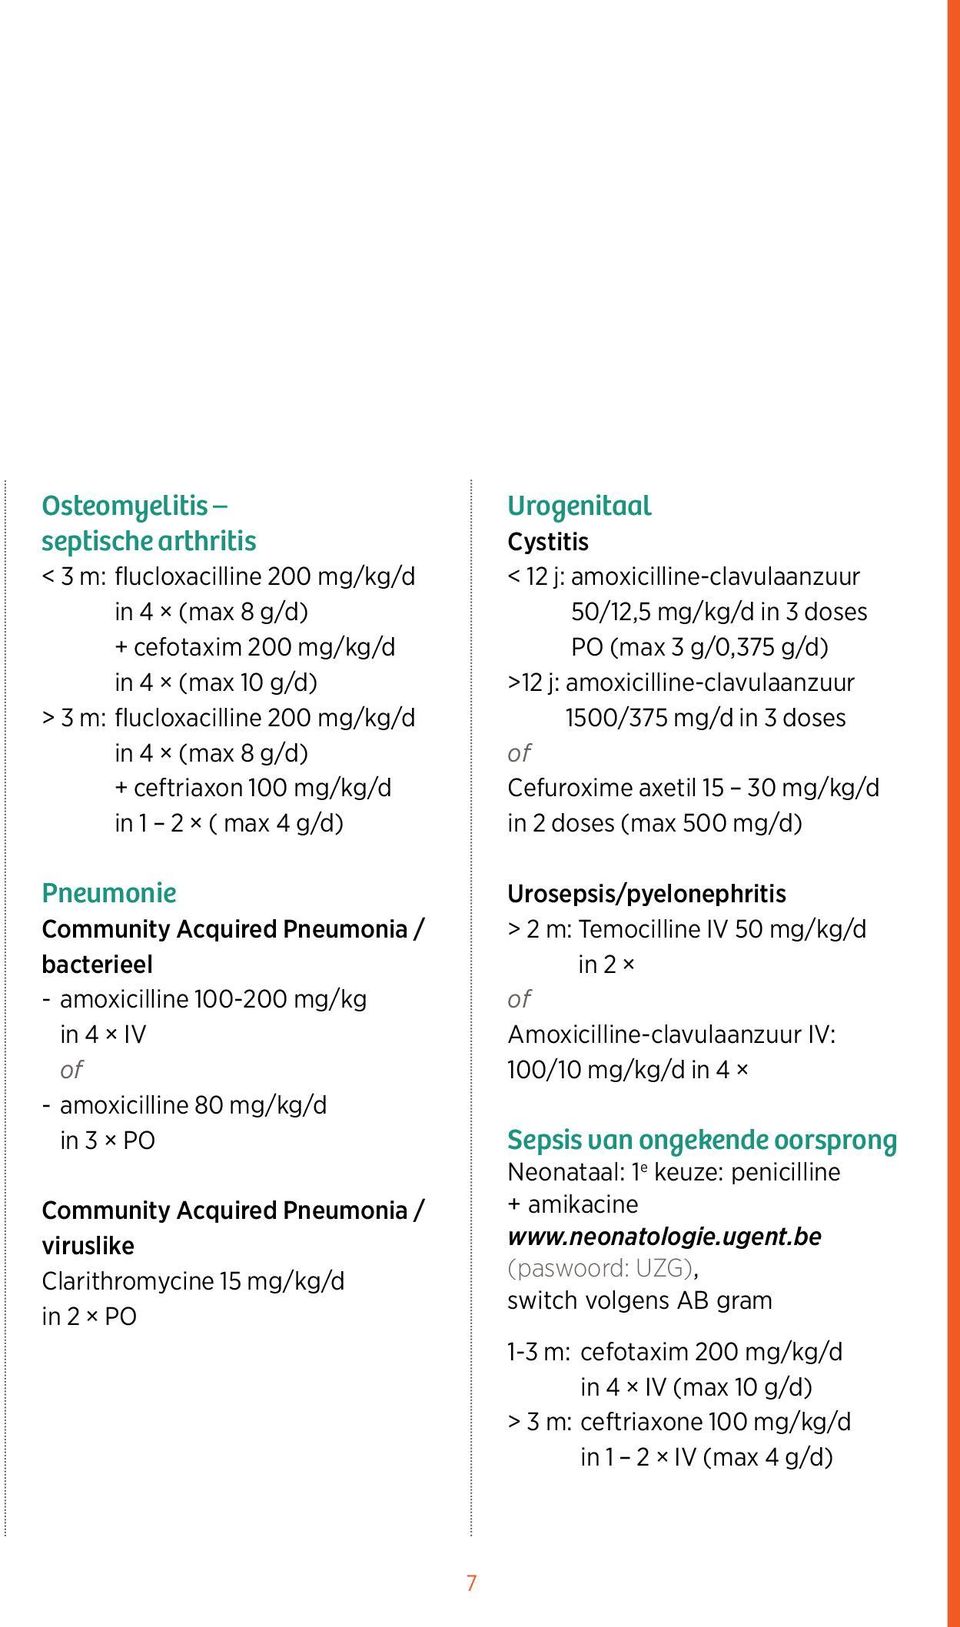 Clarithromycine 15 mg/kg/d in 2 PO Urogenitaal Cystitis < 12 j: amoxicilline-clavulaanzuur 50/12,5 mg/kg/d in 3 doses PO (max 3 g/0,375 g/d) >12 j: amoxicilline-clavulaanzuur 1500/375 mg/d in 3 doses